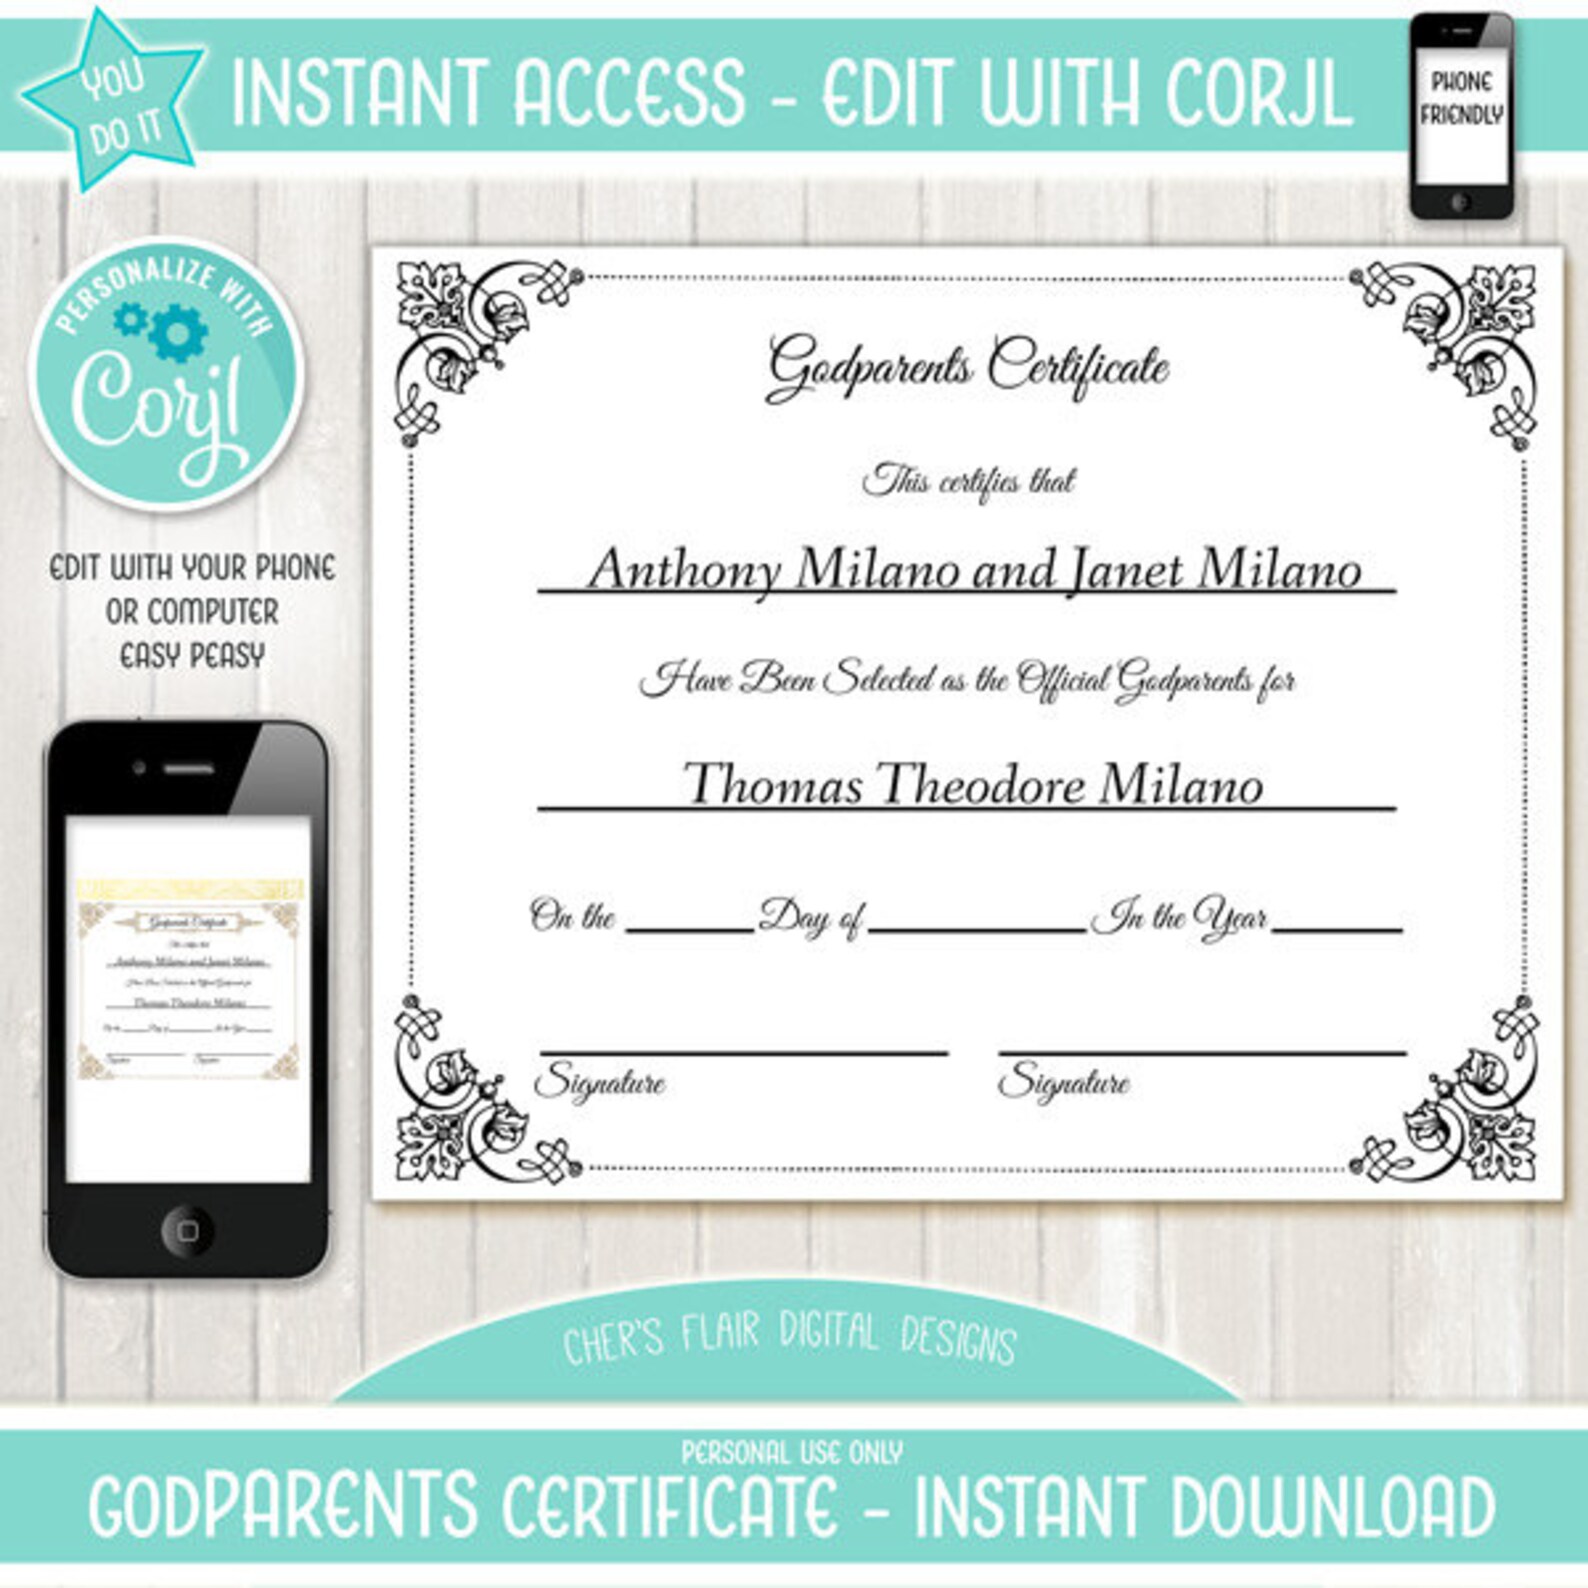 GODPARENTS CERTIFICATE DIY Official Godparents Certificate Etsy